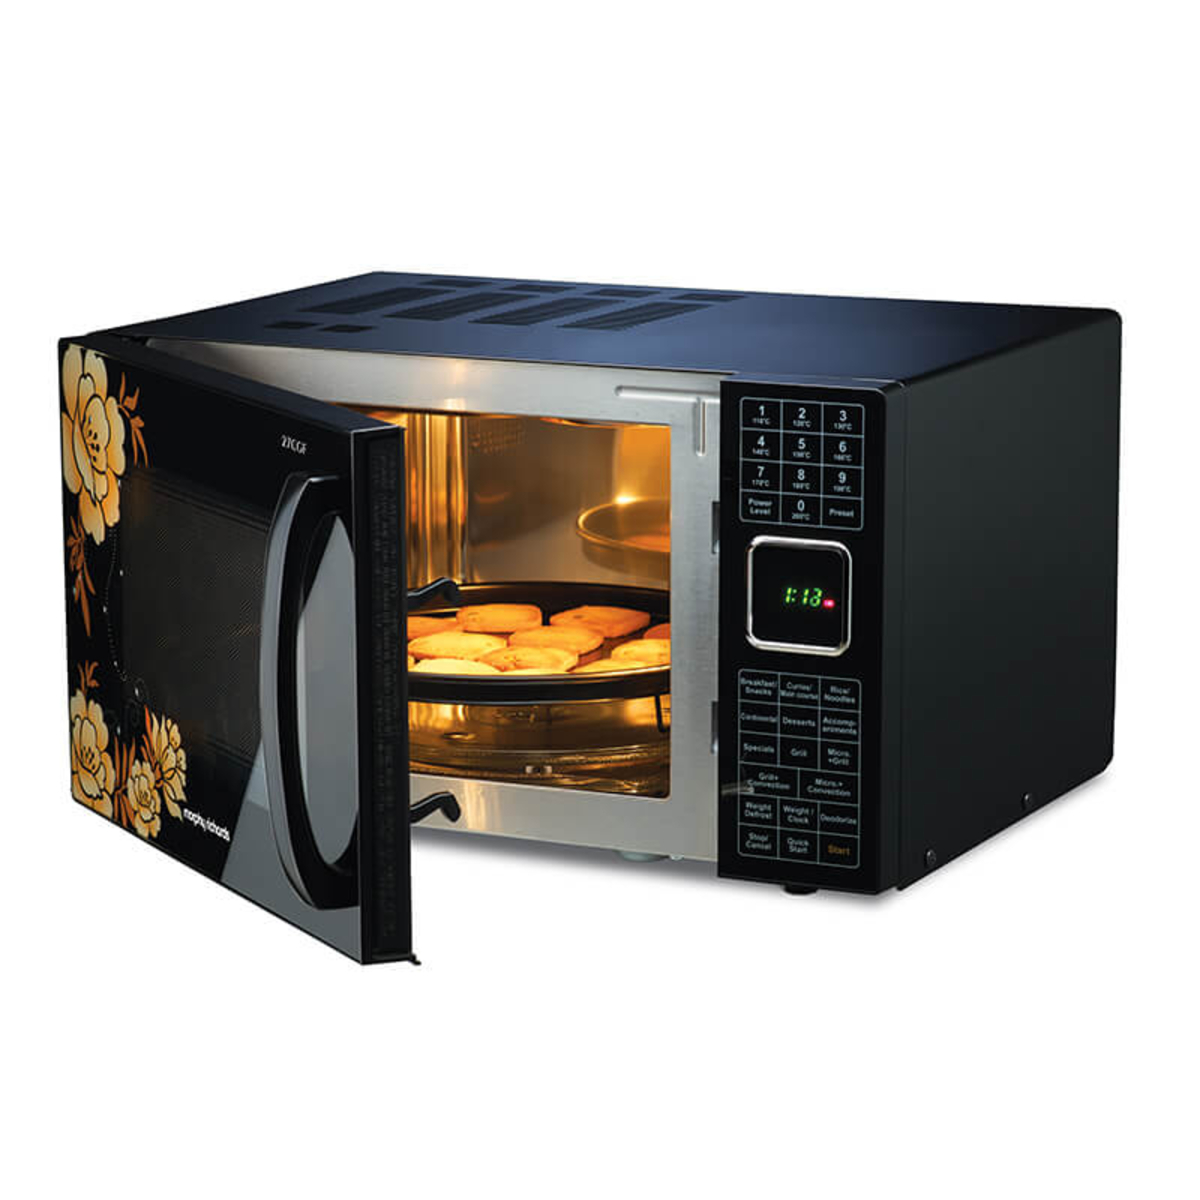 Morphy Richards Microwave Oven 27CGF 27Ltr